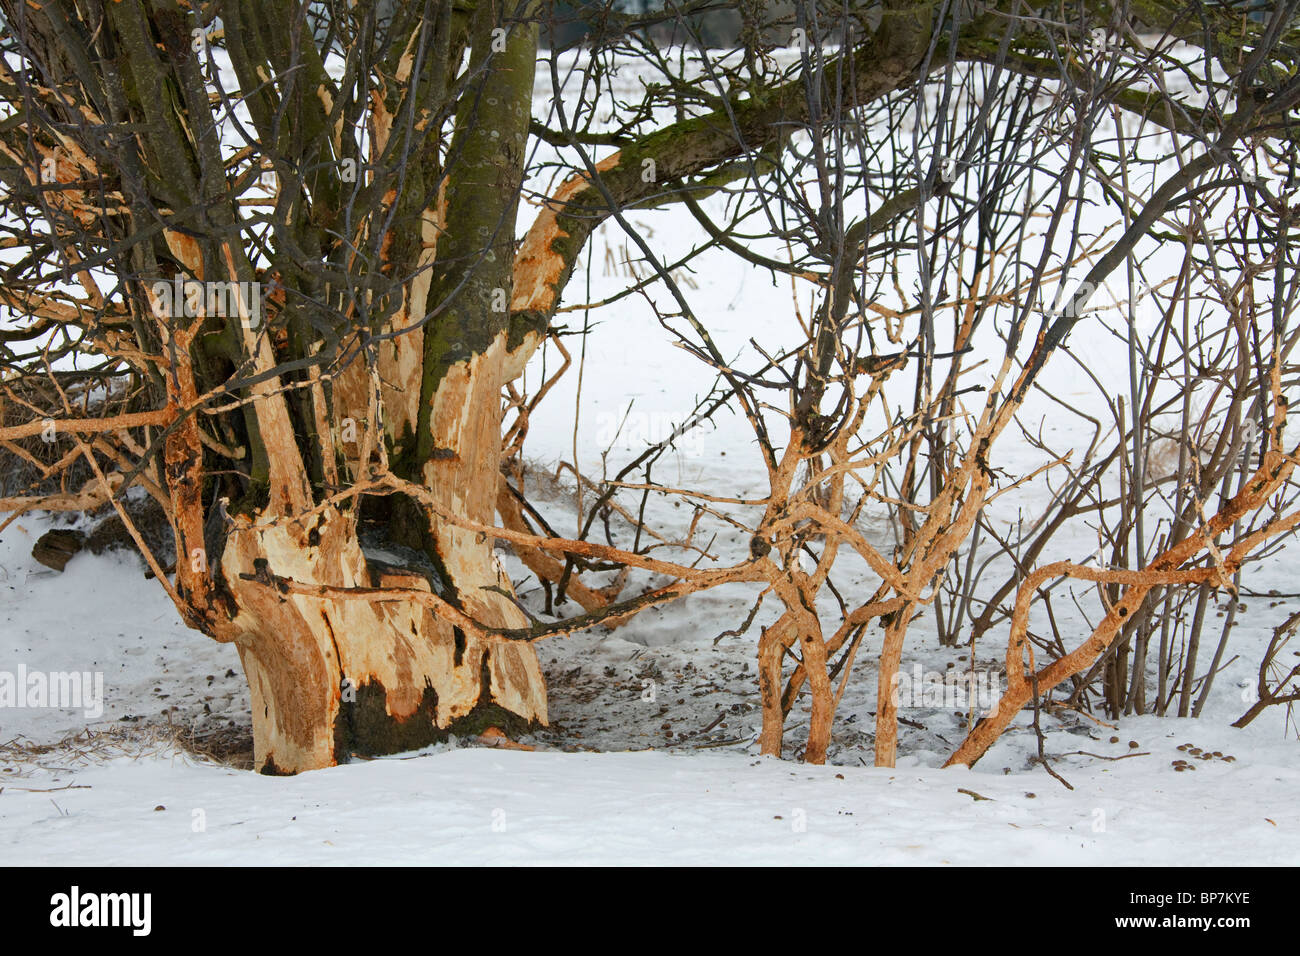 Fruit tree damaged by rabbits (Oryctolagus cuniculus) and other rodents by eating the bark in winter Stock Photo